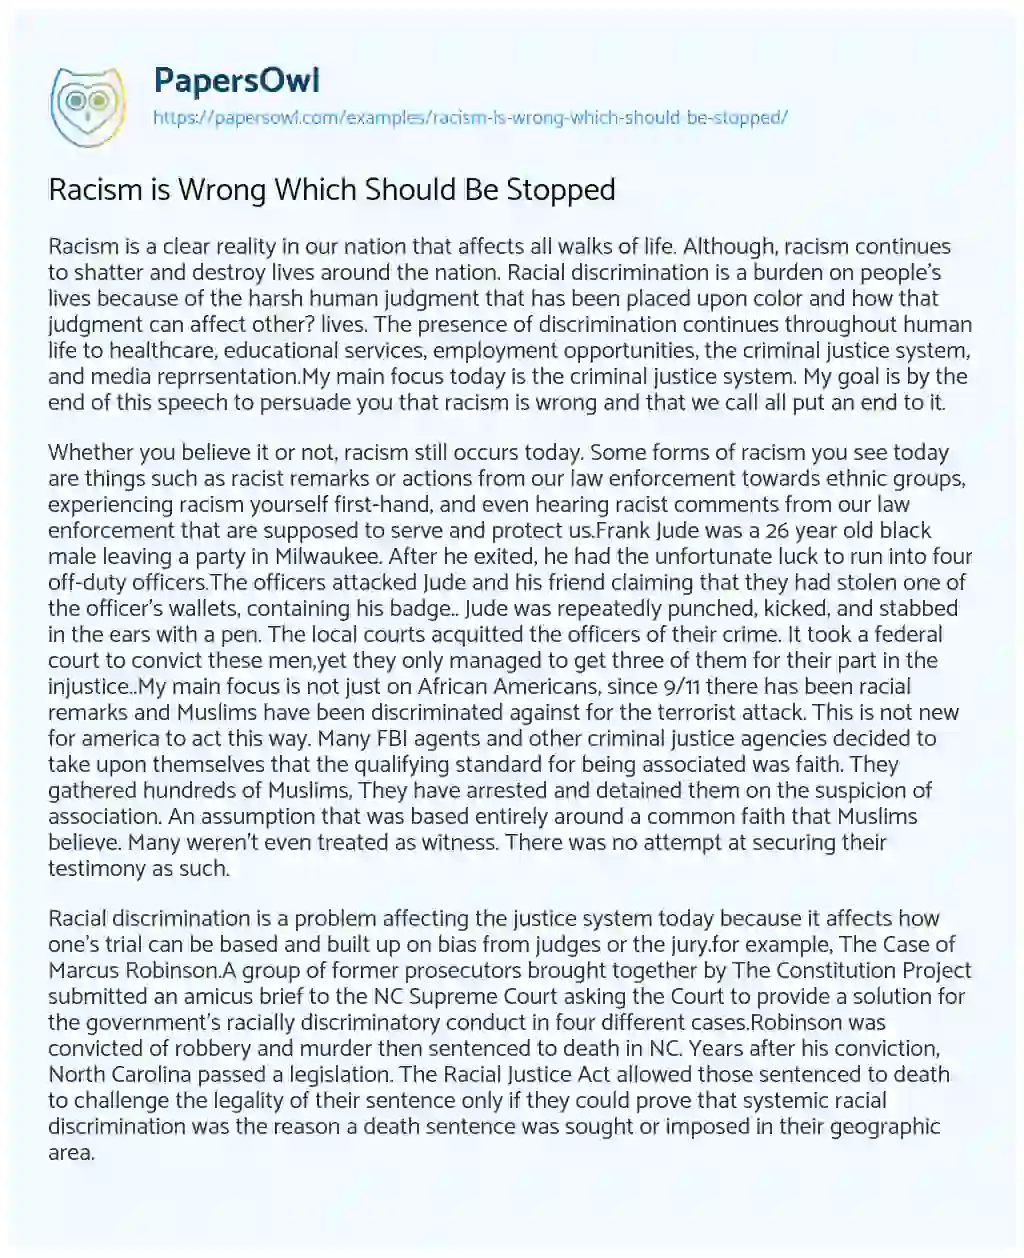 Essay on Racism is Wrong which should be Stopped